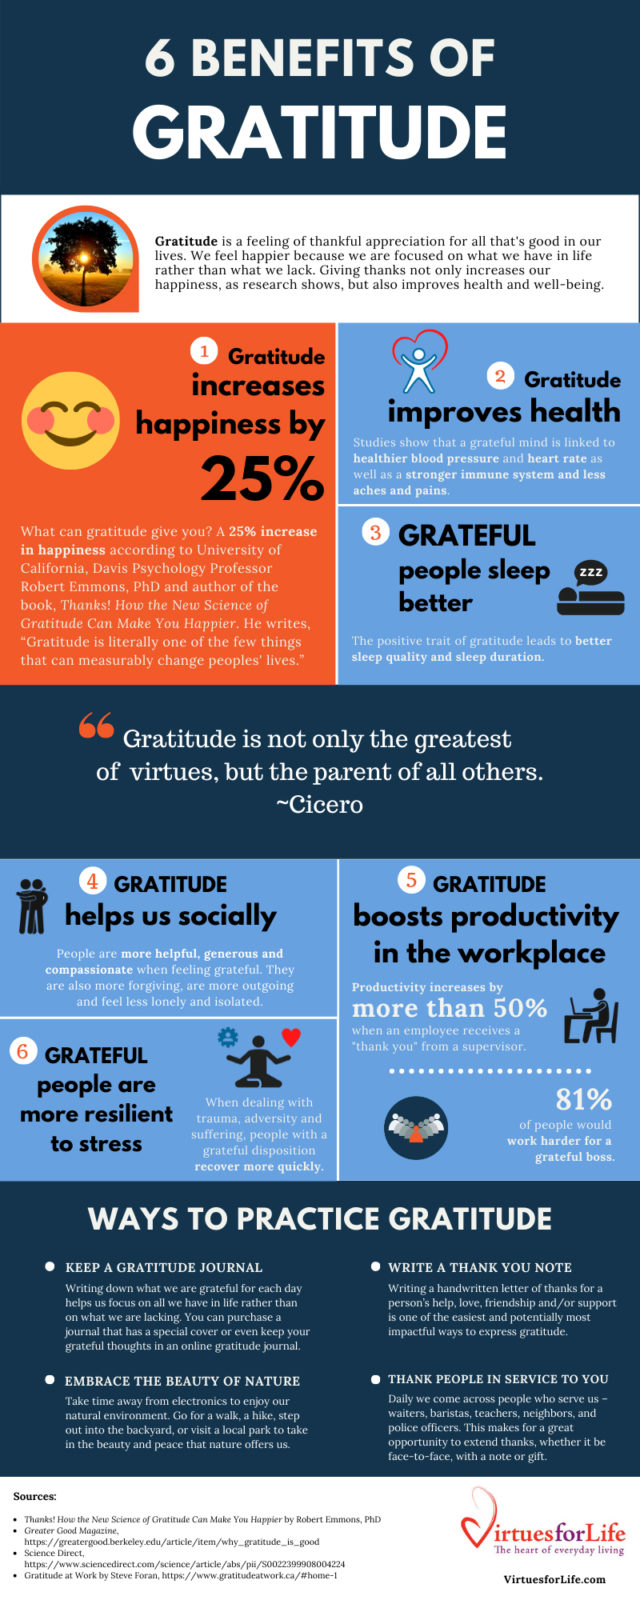 6 Benefits of Gratitude How Feeling Grateful is Good for Us (Infographic)